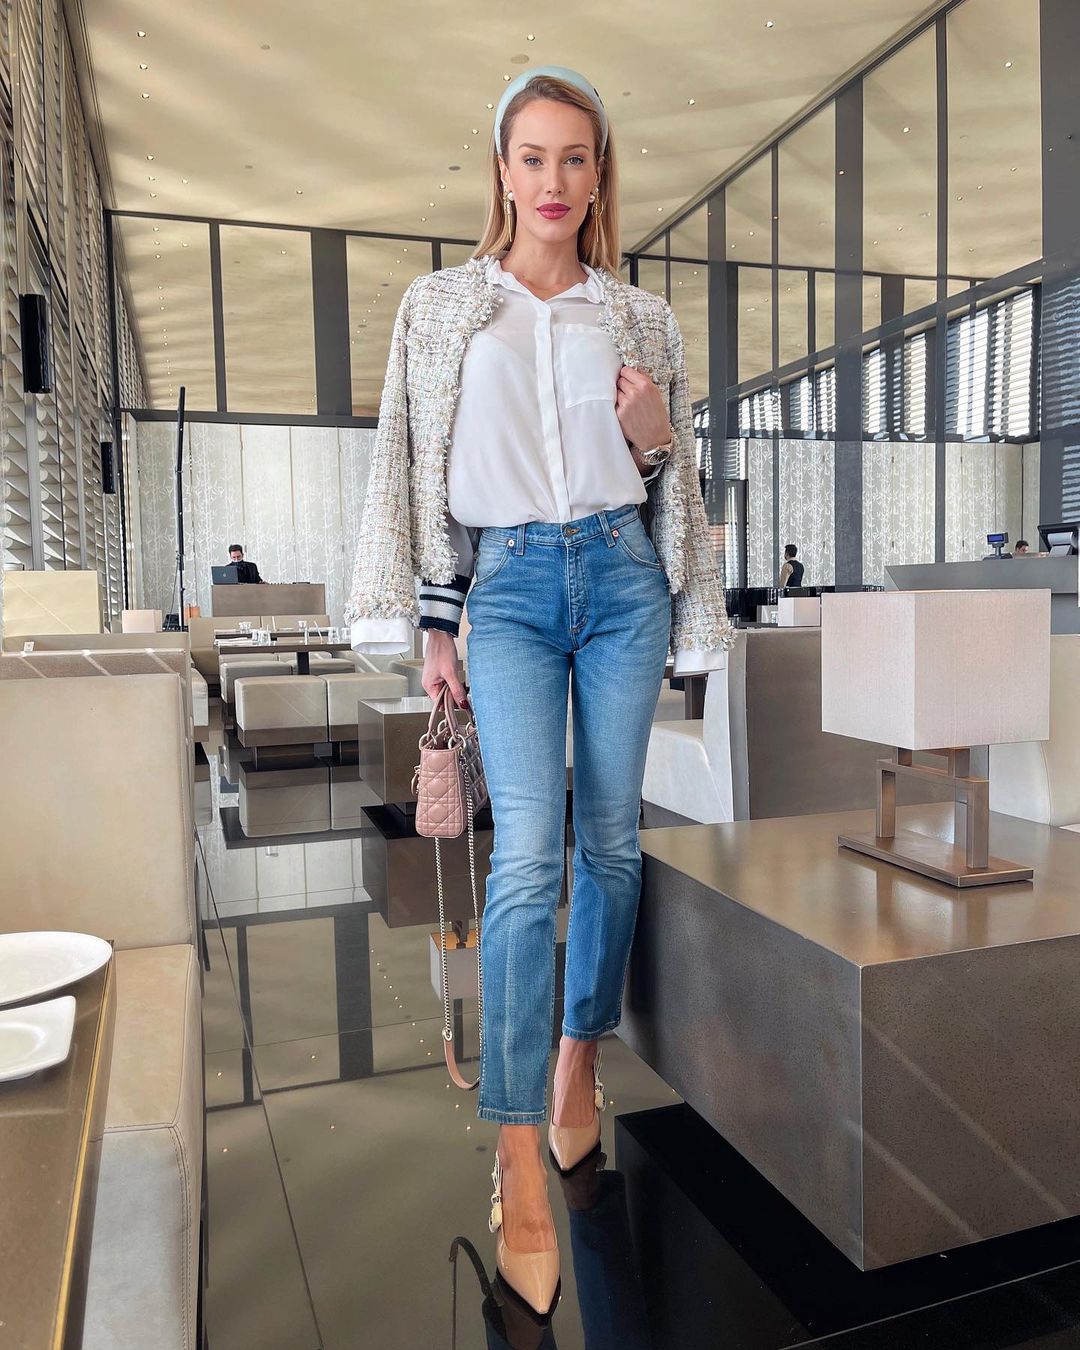 Emporio Armani Caffe and Ristorante, located on the ground floor of the Emporio Armani retail headquarters.  The bar is divided into two sections - the ground floor is a cafe and the upper floor is a fine-dining restaurant and champagne bar.  Photo: @giada_todesco